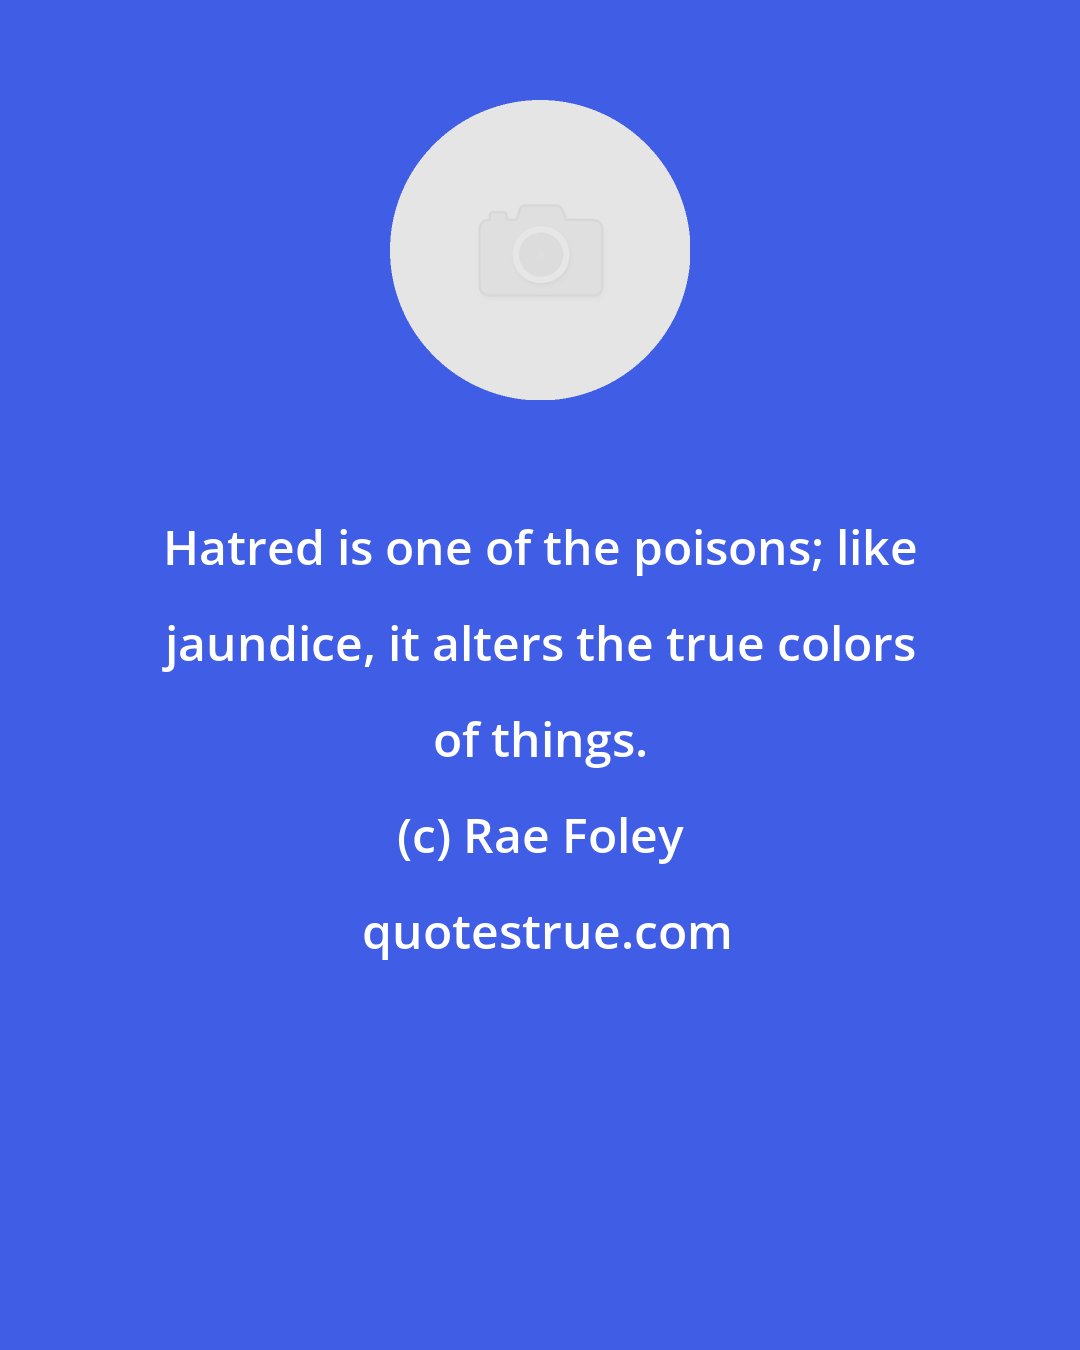 Rae Foley: Hatred is one of the poisons; like jaundice, it alters the true colors of things.